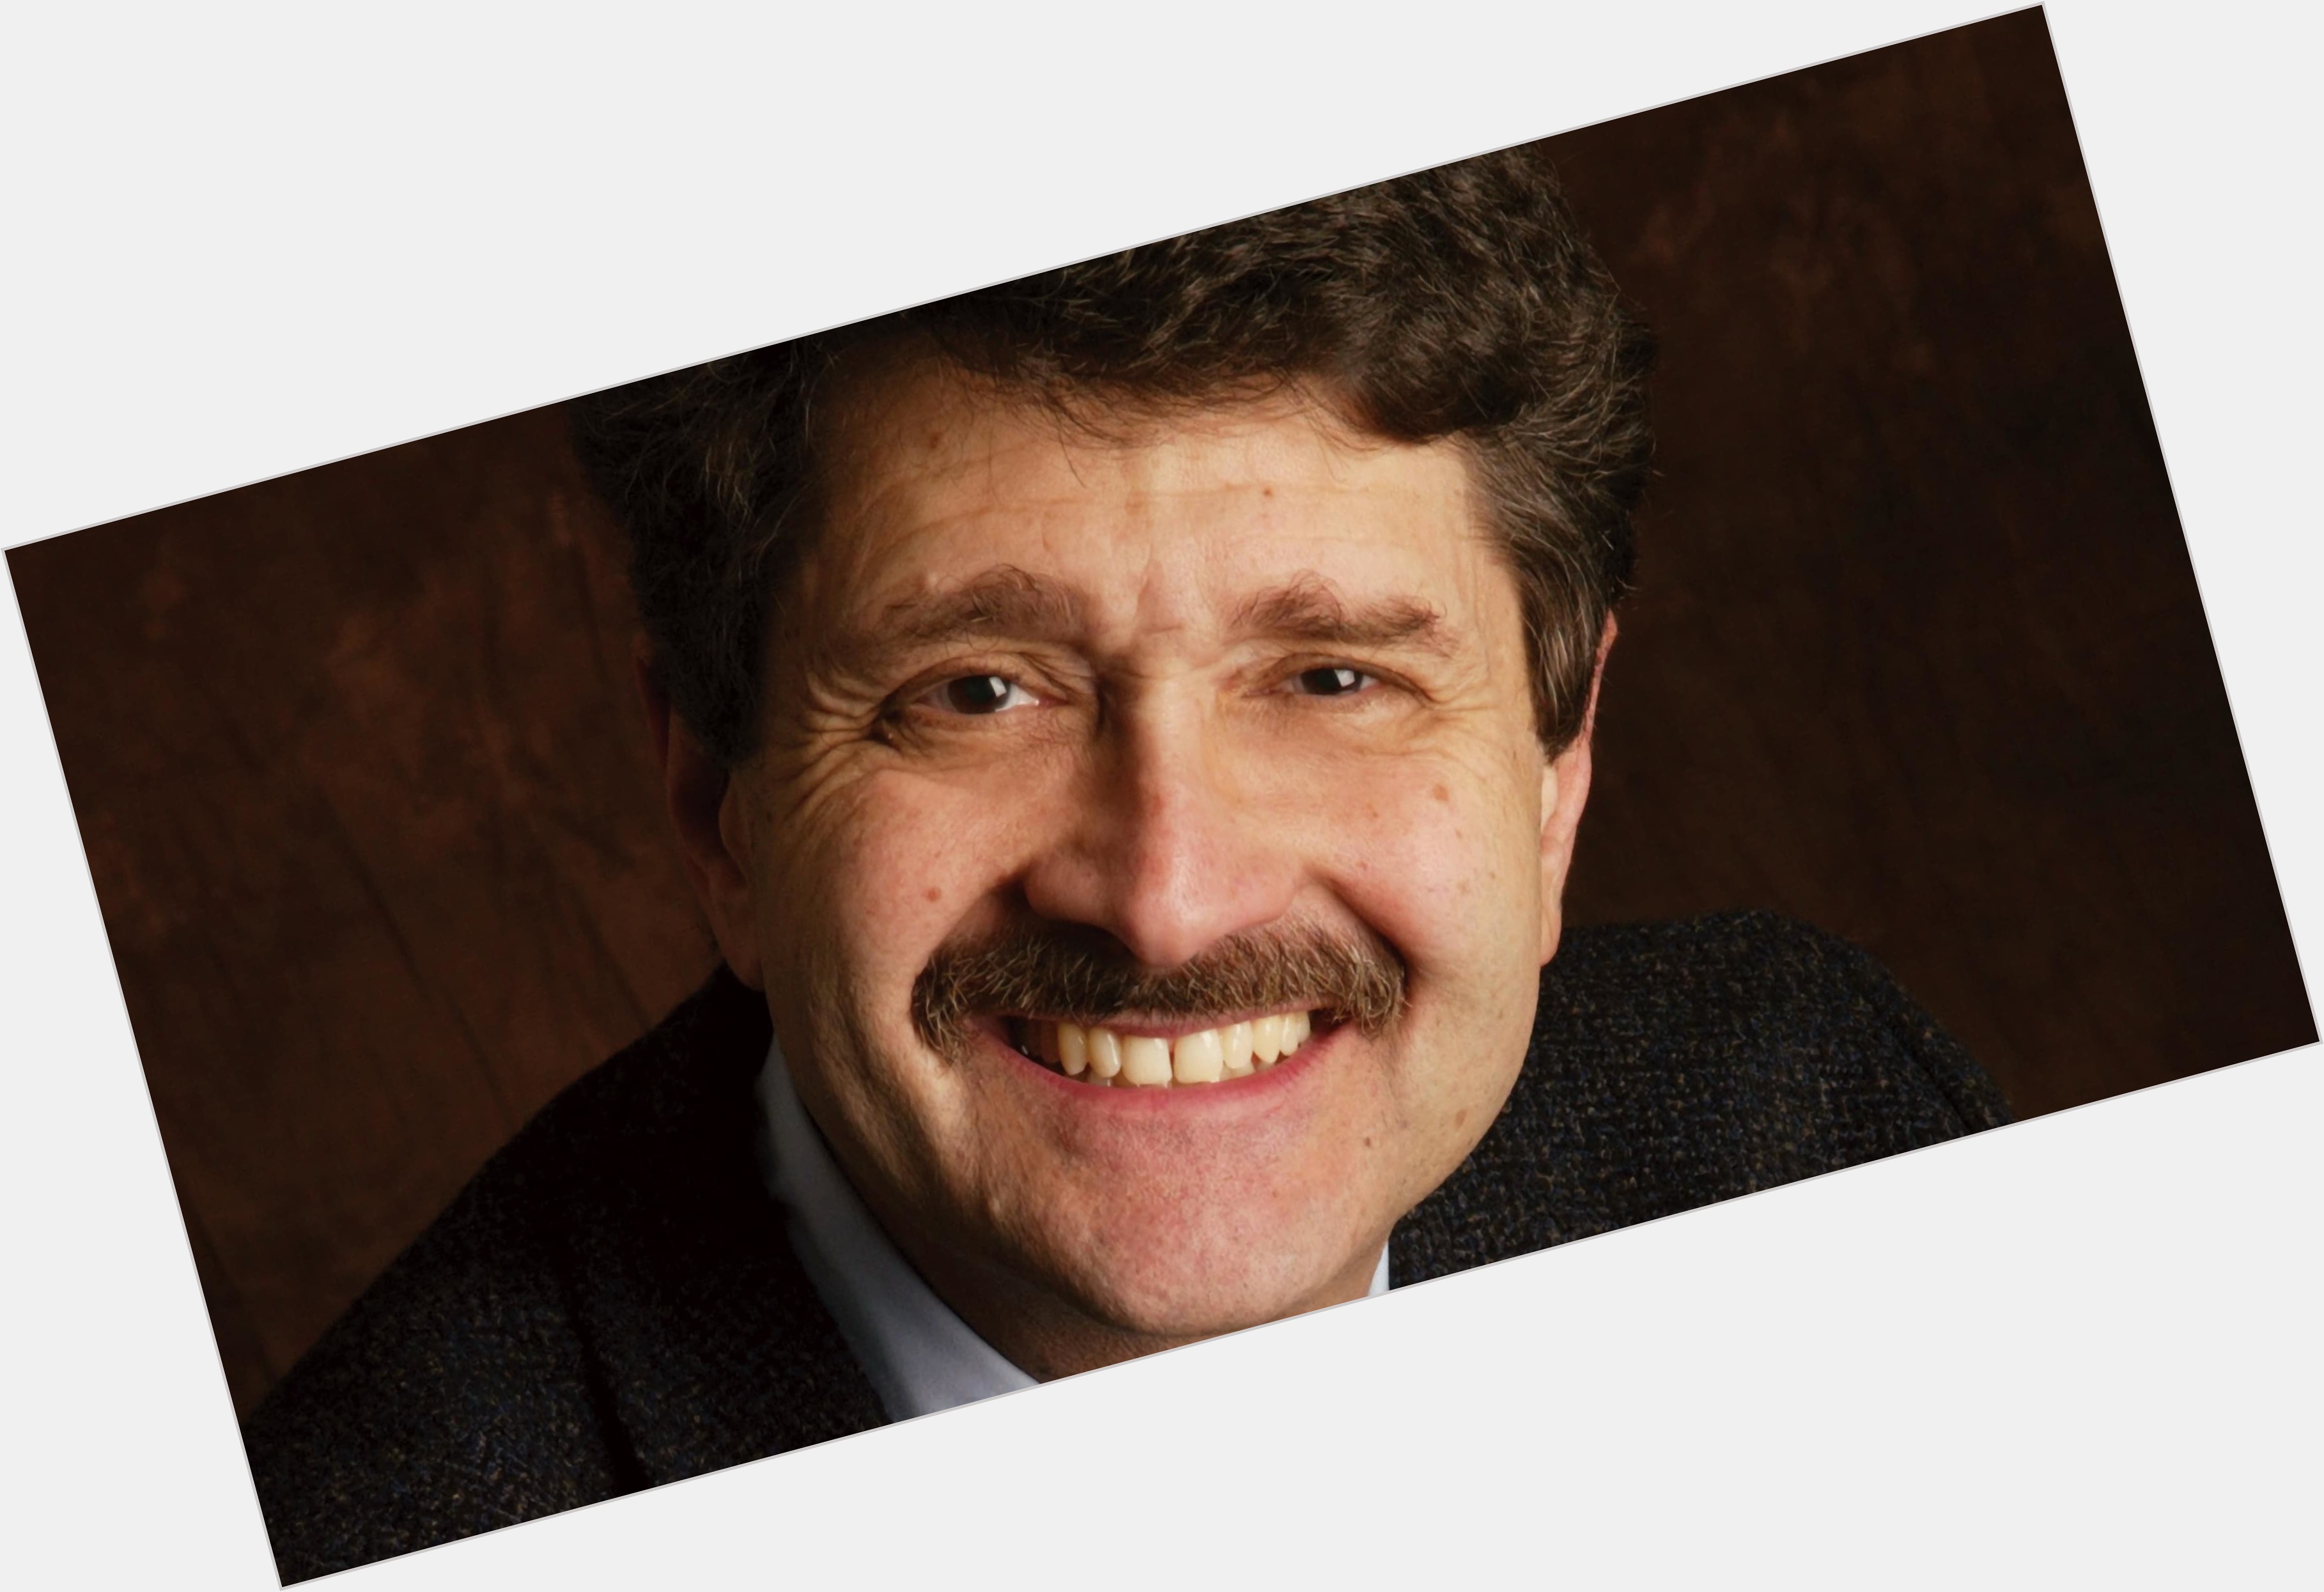 <a href="/hot-men/michael-medved/is-he-christian-iheartradio-republican-xm-liberal-what">Michael Medved</a> Average body,  dark brown hair & hairstyles